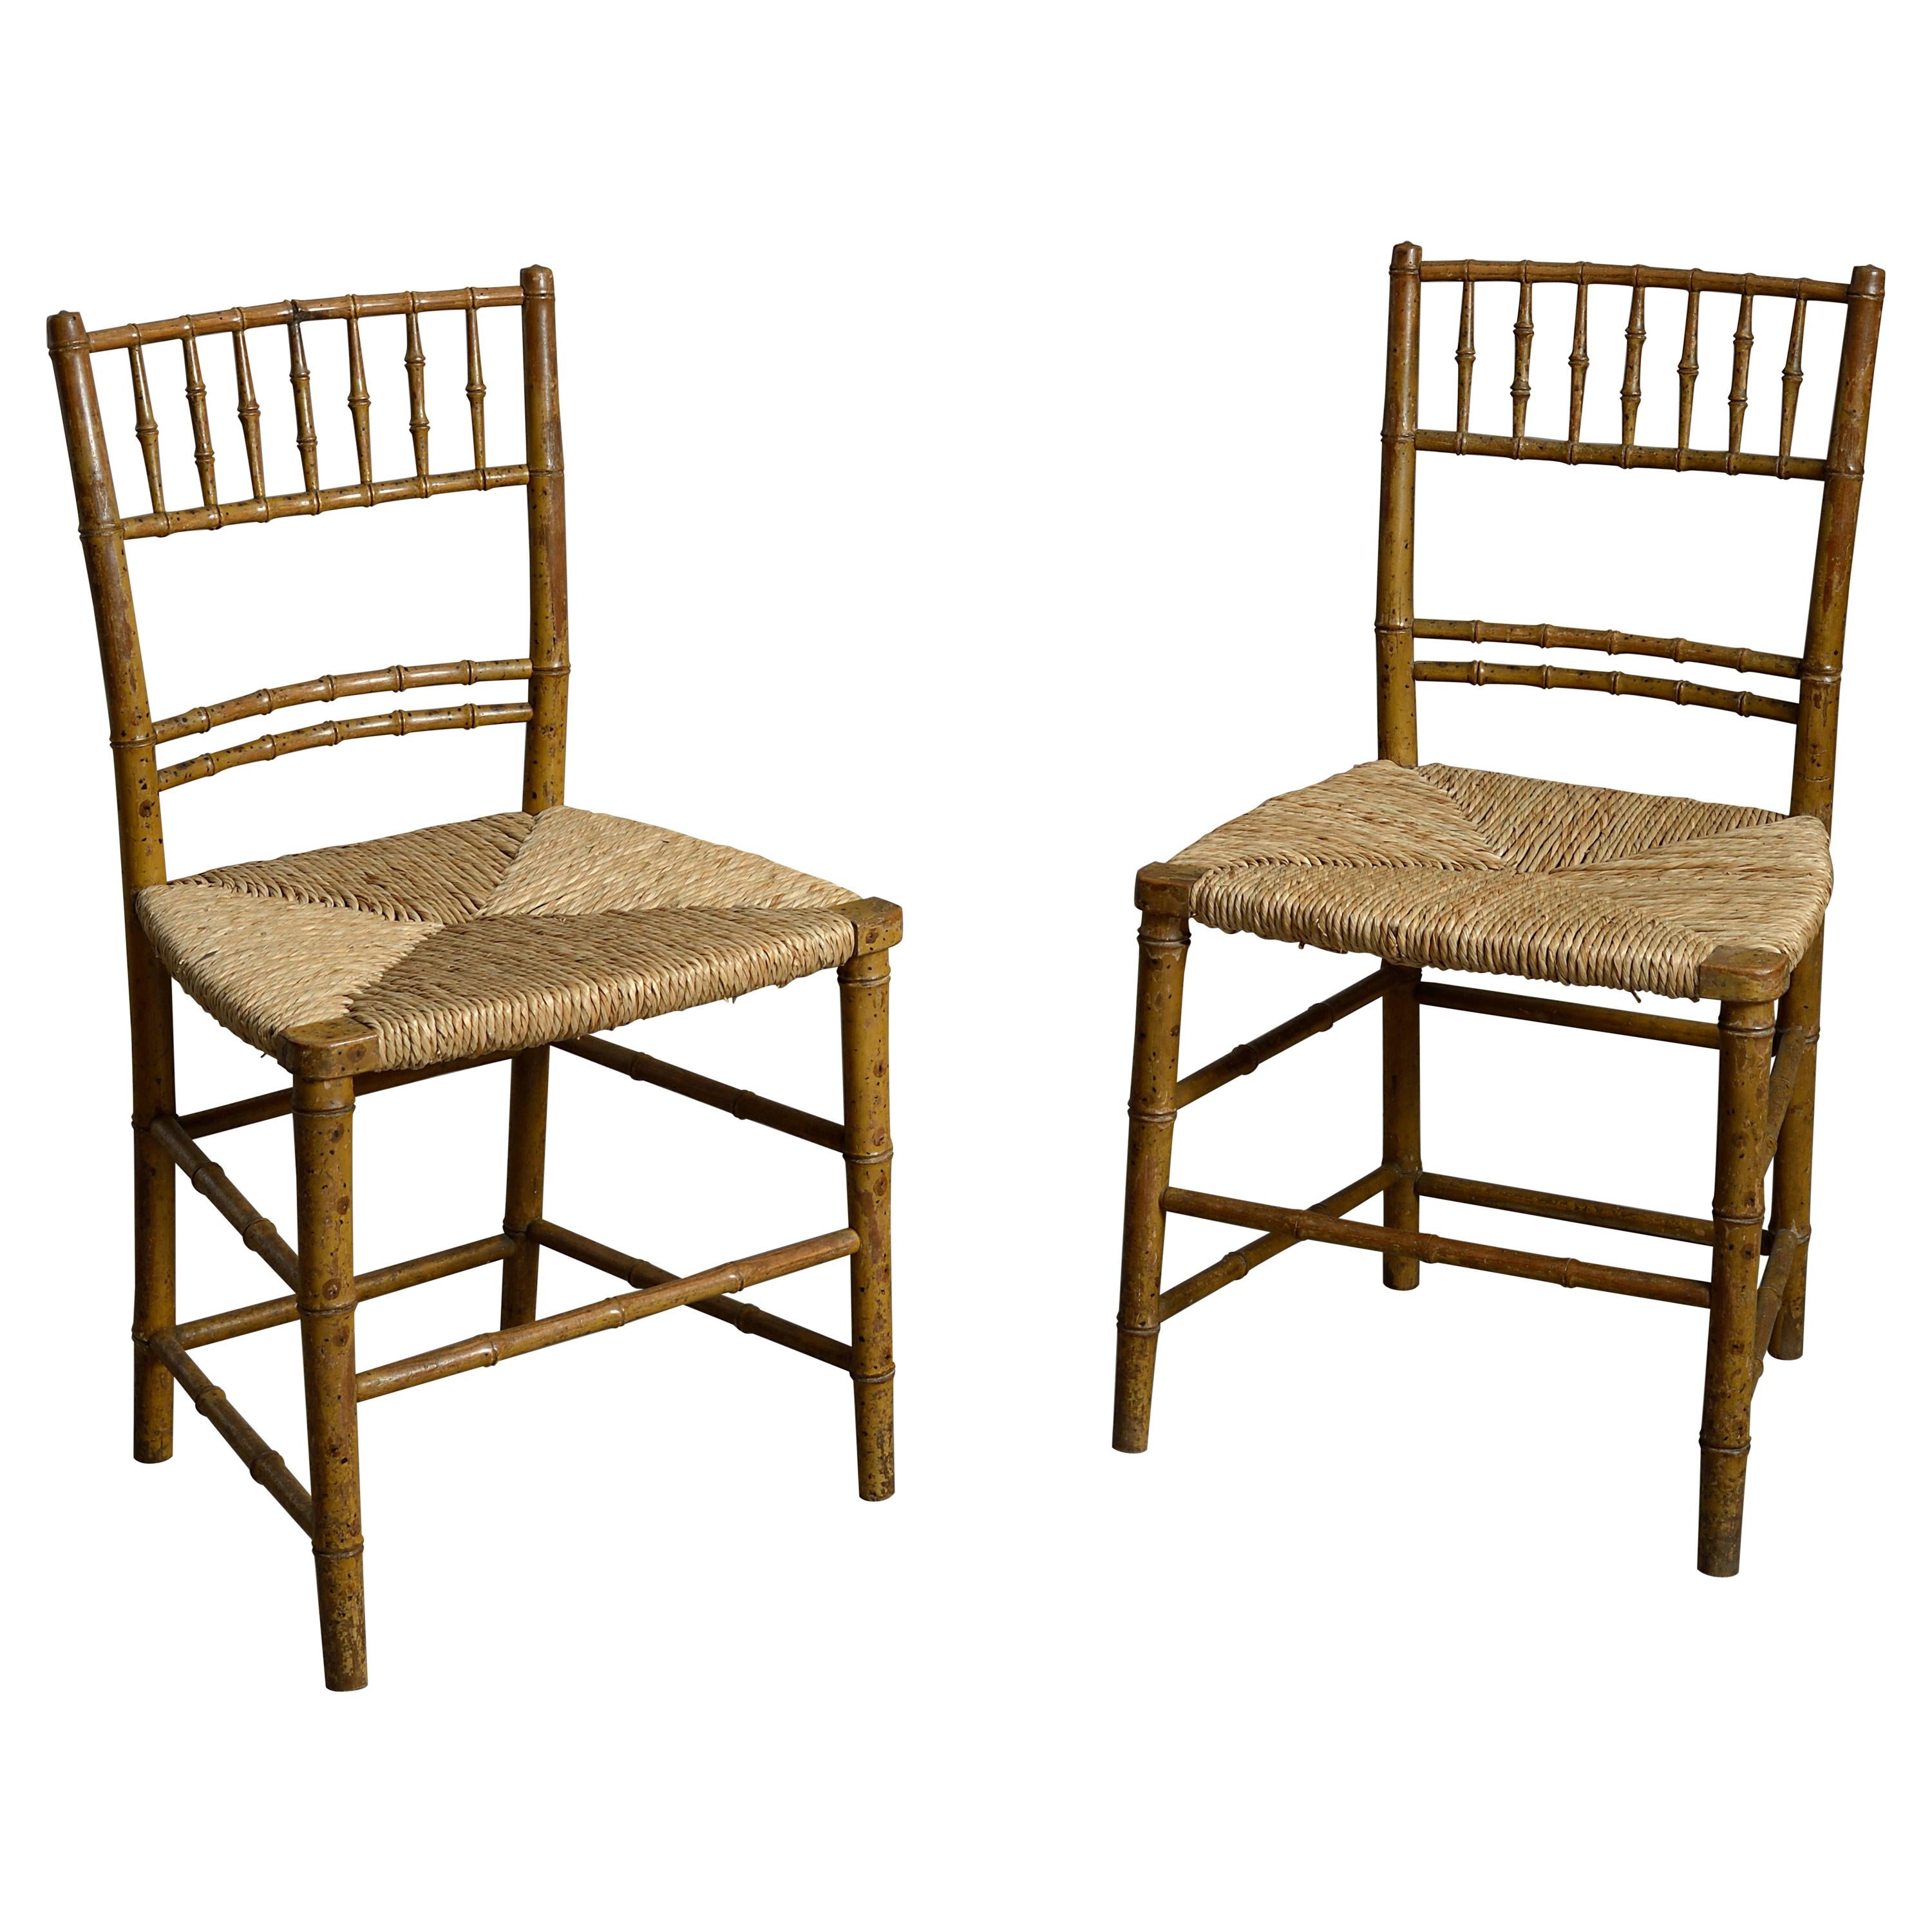 Pair of Early 19th Century Faux Bamboo Bedroom Chairs